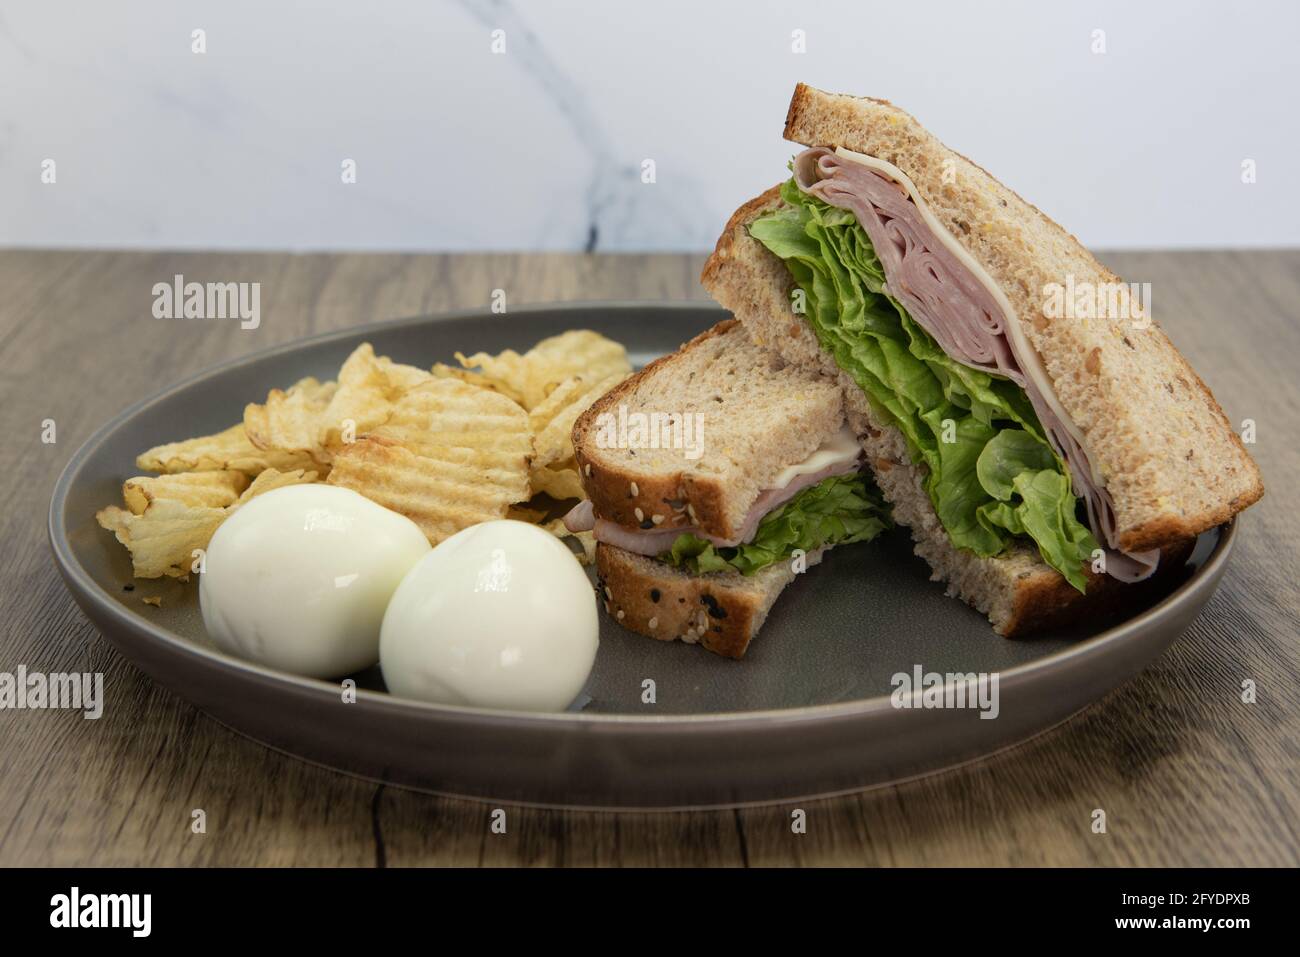 Appetizing ham and cheese sandwich with hardboiled eggs and chips is a perfect meal for a quick lunch break at work. Stock Photo